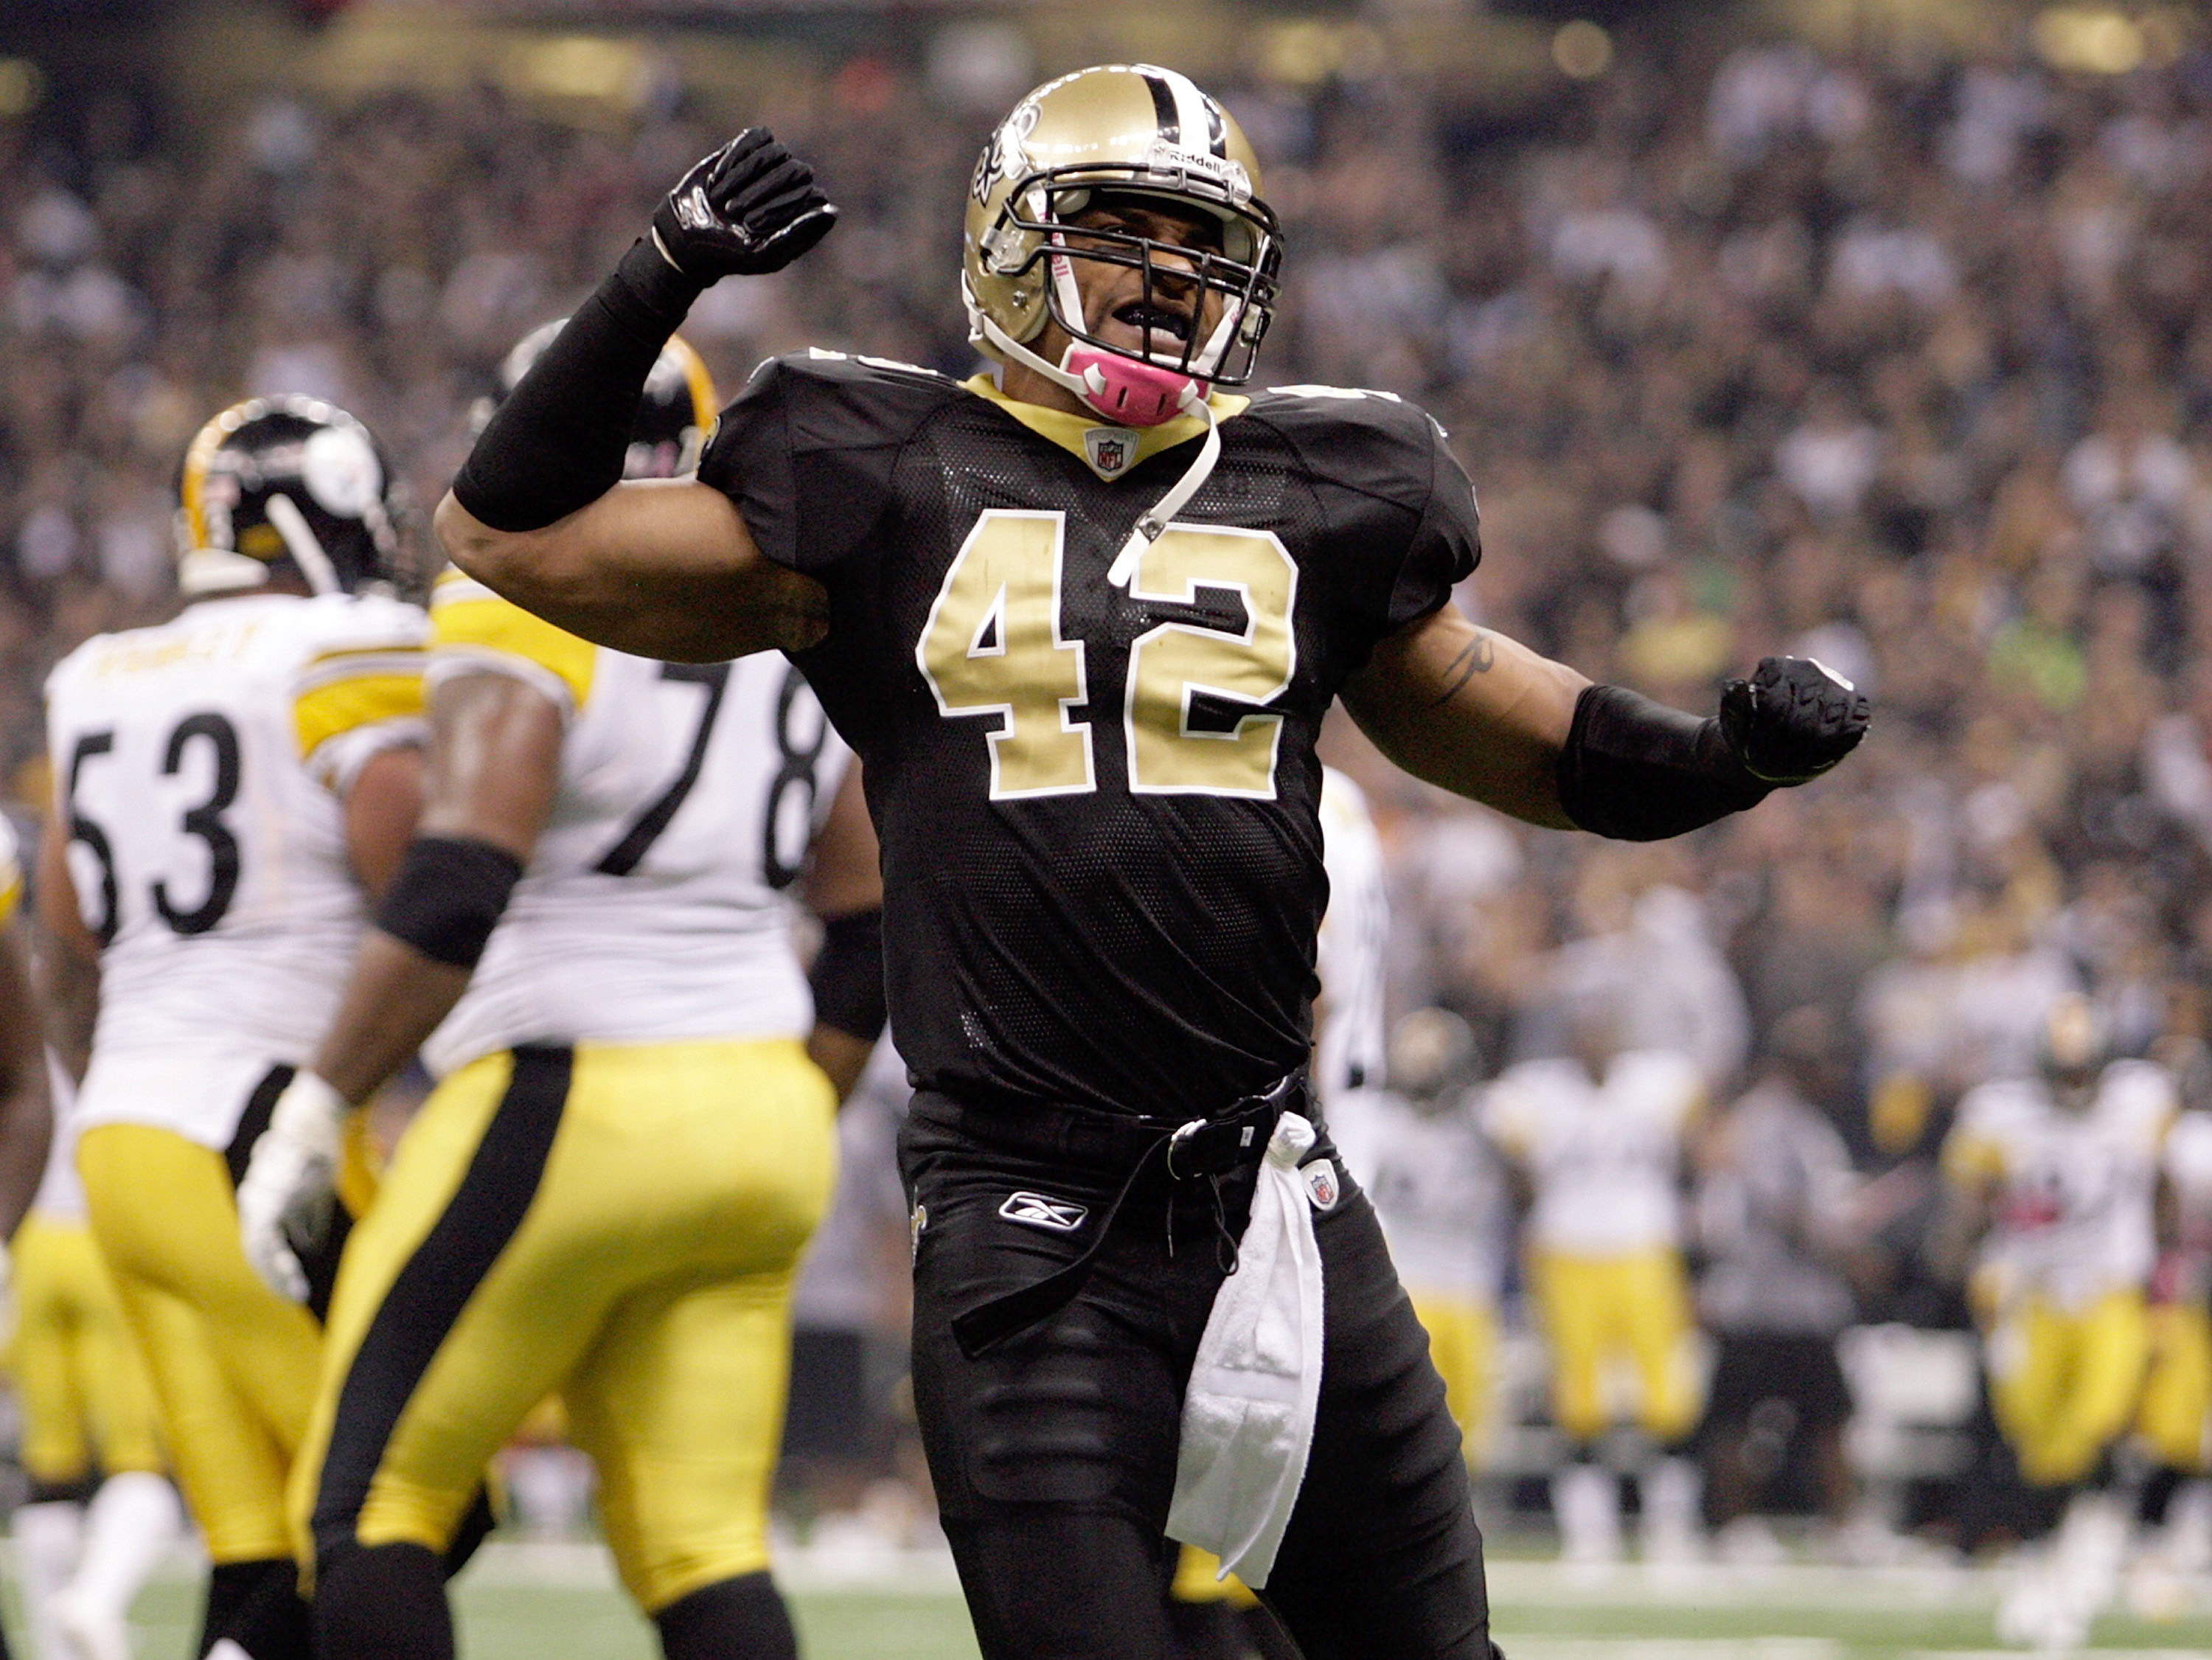 Darren Sharper celebrates a play against the Pittsburgh Steelers at the Louisiana Superdome on October 31, 2010 (Getty Images)